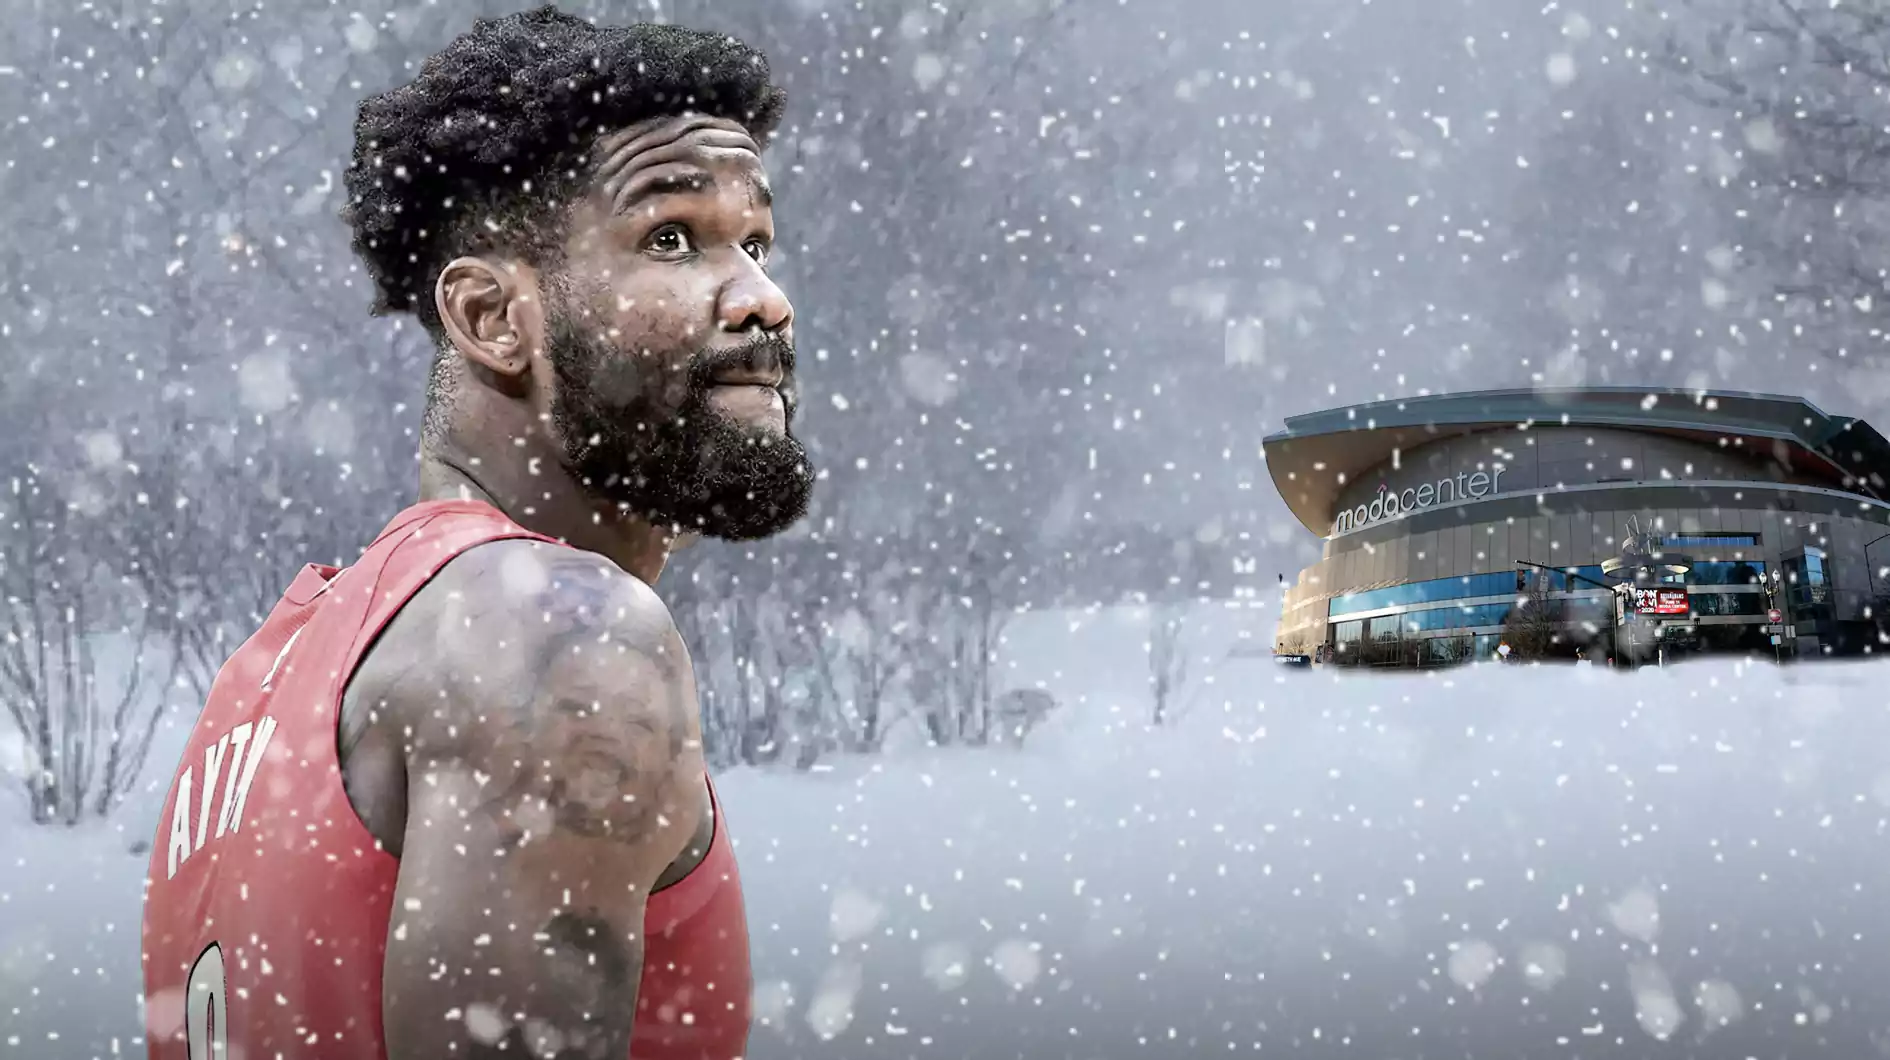 Deandre Ayton in a snowstorm with the Blazers arena in the distance